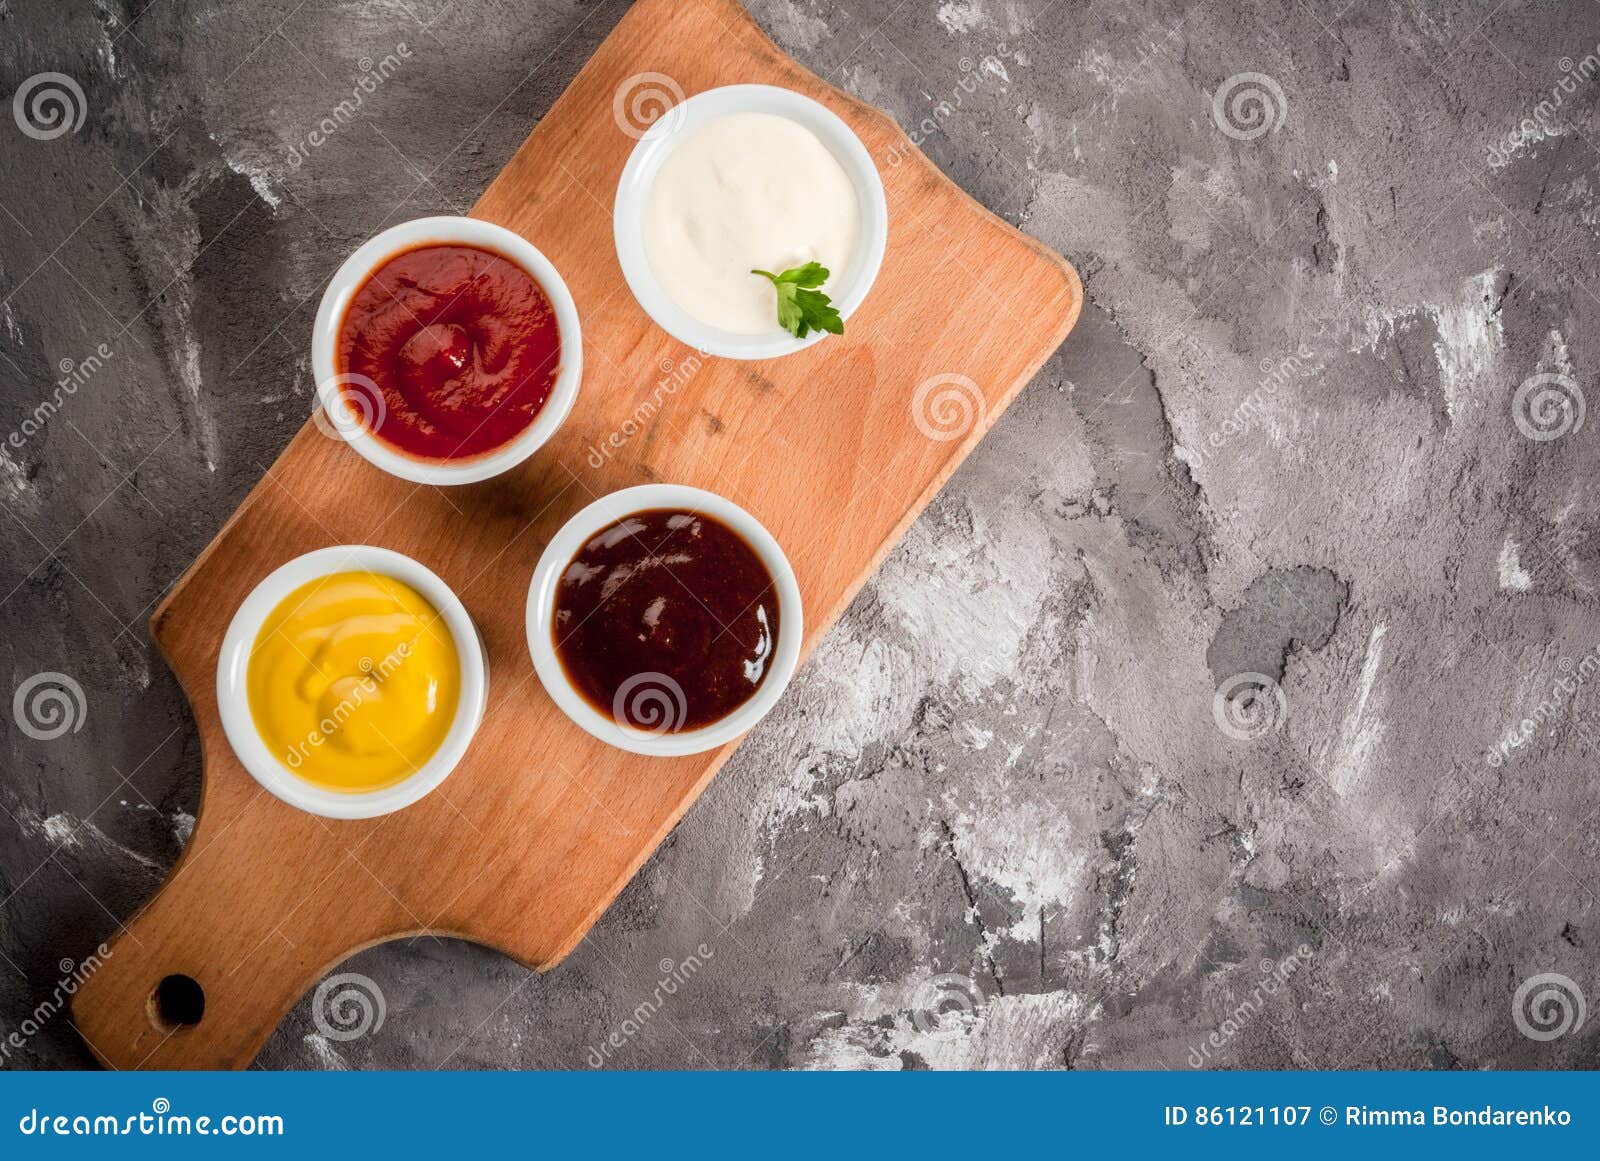 classic set of sauces in white saucers